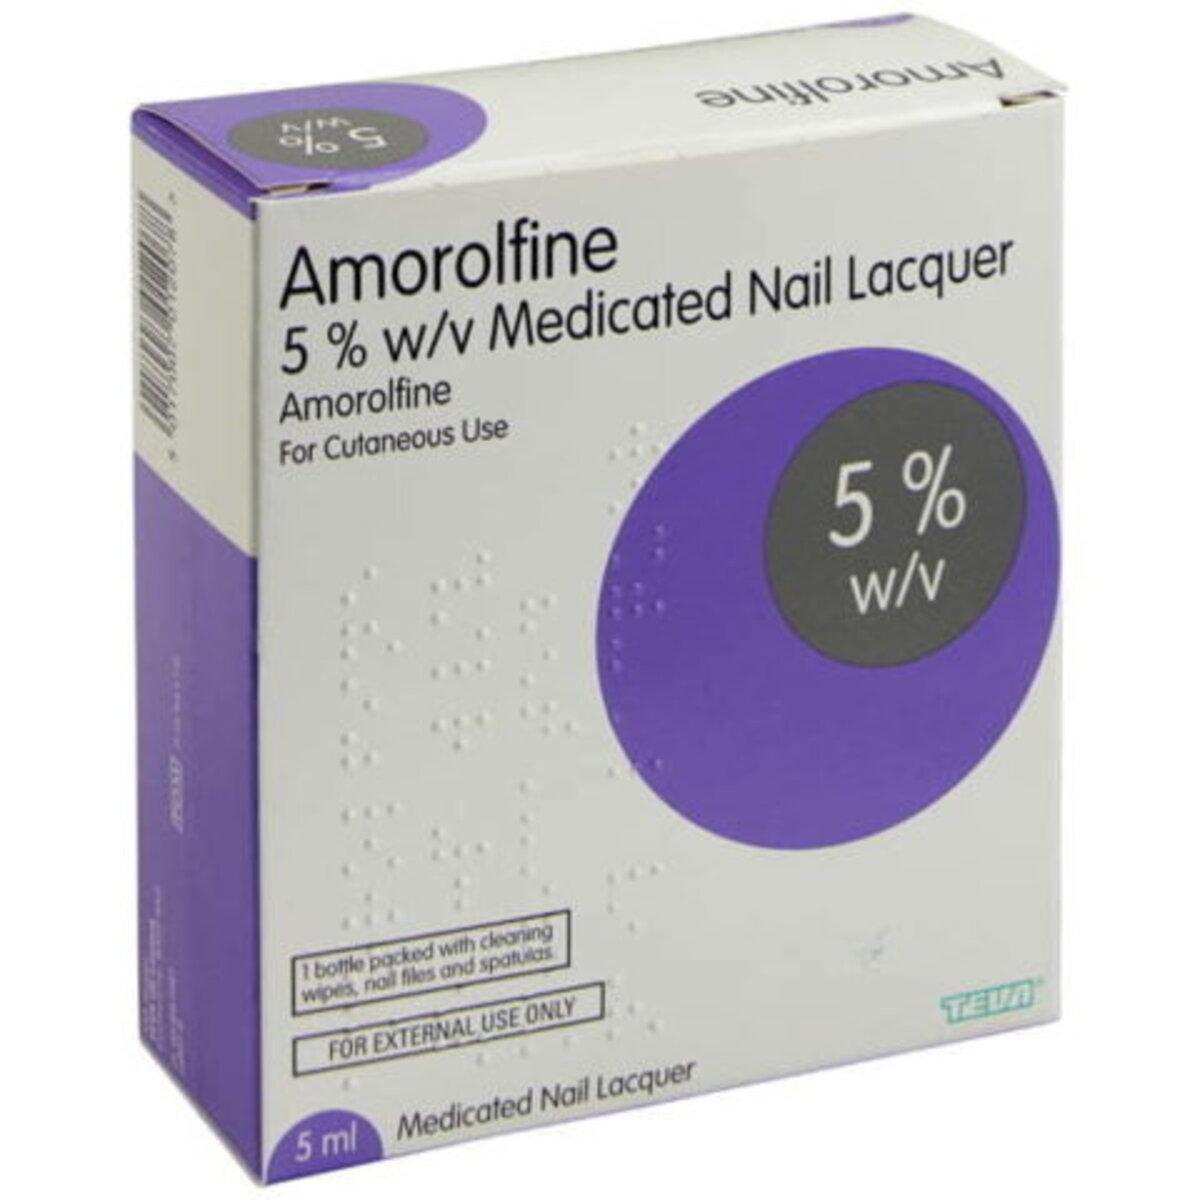 Watsons - Save $5 off Loceryl 1.25ml, topical treatment containing 5%  Amorolfine, the world's No.1 topical fungal nail treatment brand.  Onychomycosis or fungal nail infection can lead to permanent damage to the